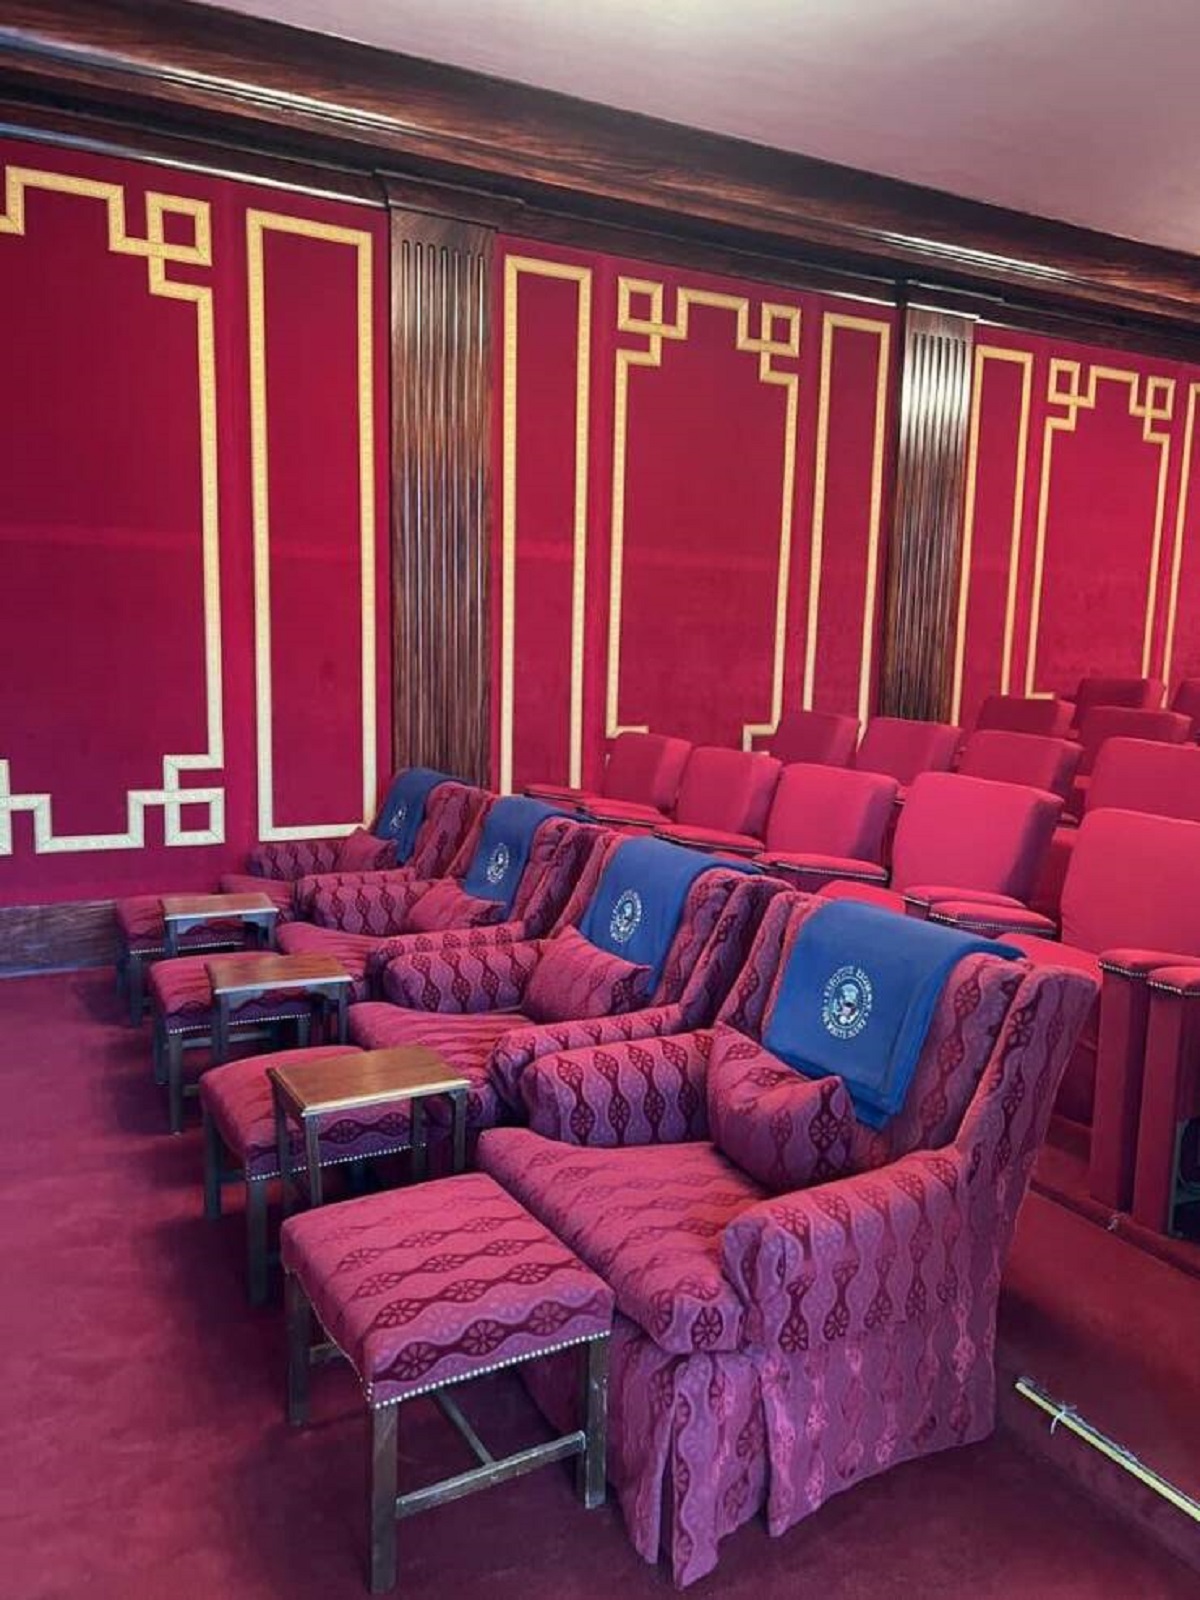 This is what the private movie theater inside the White House looks like: